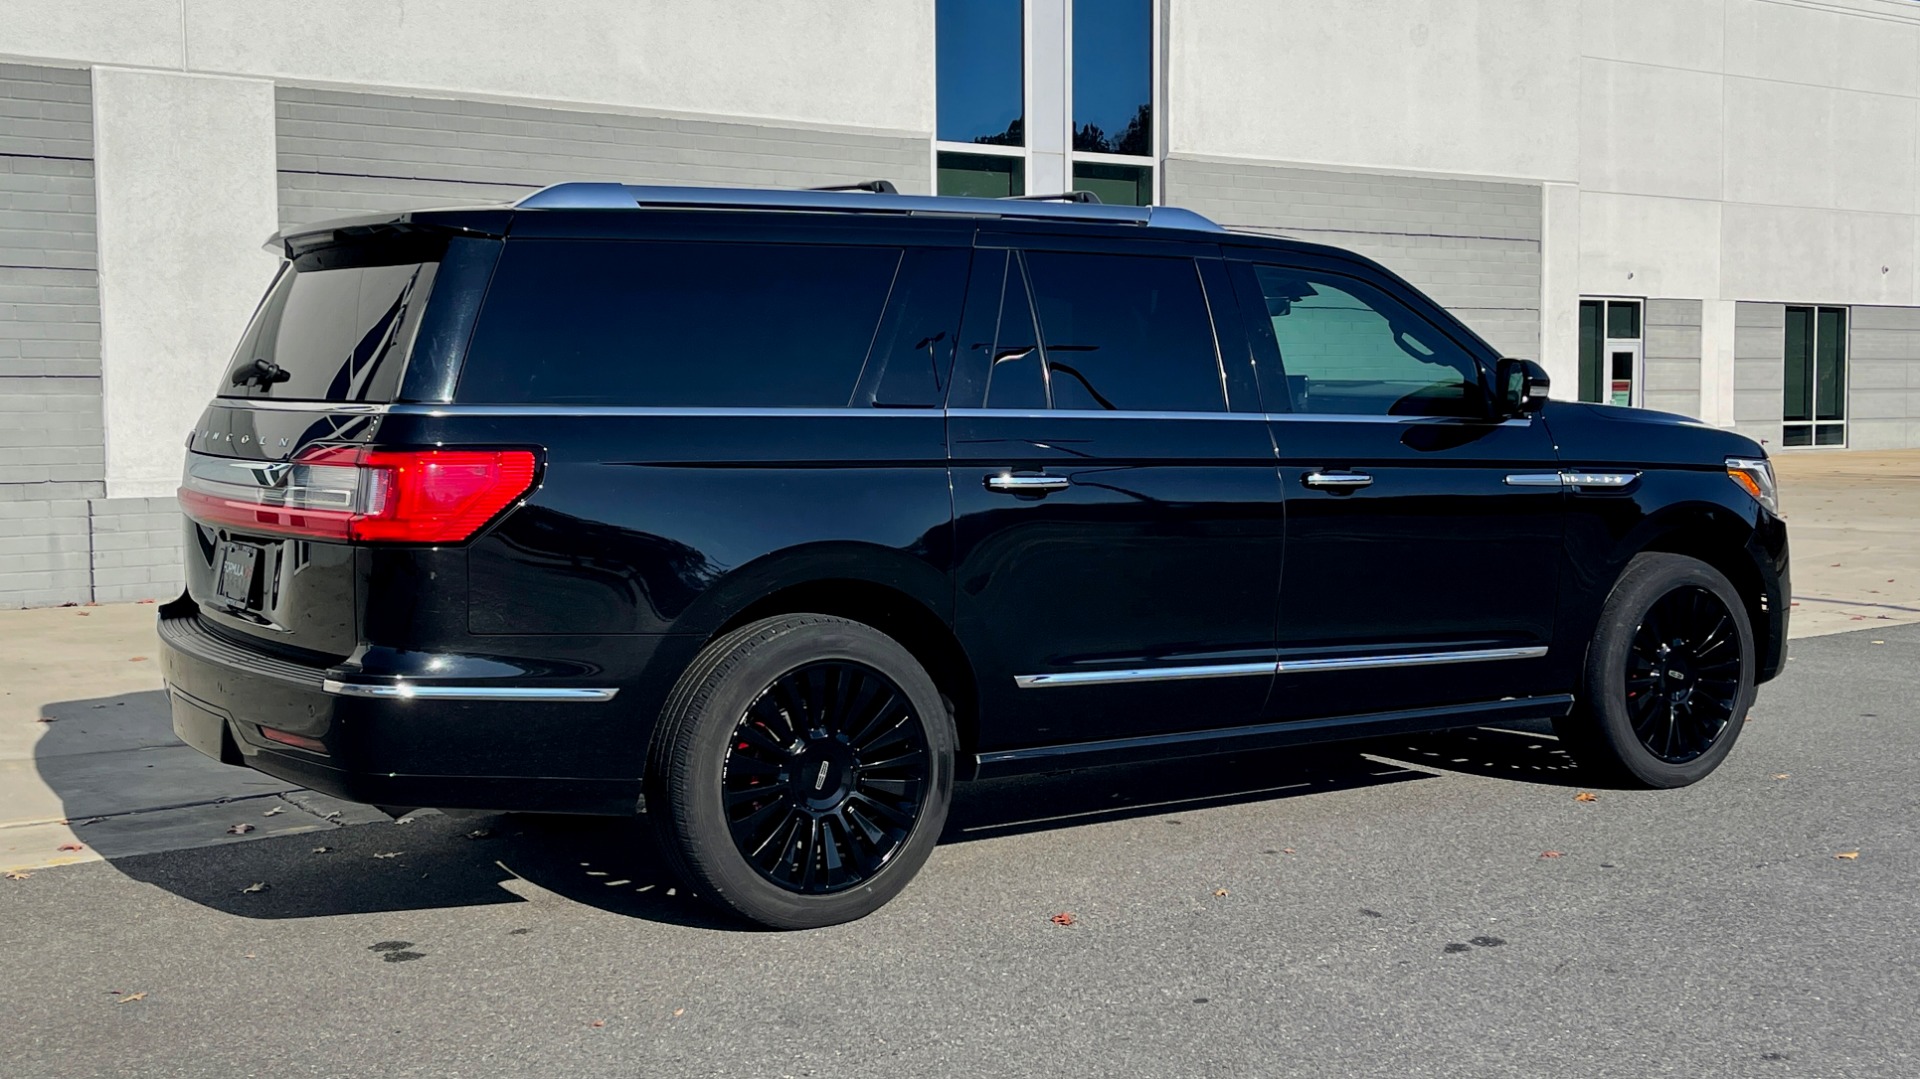 Used 2018 Lincoln NAVIGATOR L 4X4 SELECT / 3.5L V6 / 10-SPD AUTO / NAV / PANO-ROOF / 3-ROW / REARVIEW for sale Sold at Formula Imports in Charlotte NC 28227 5